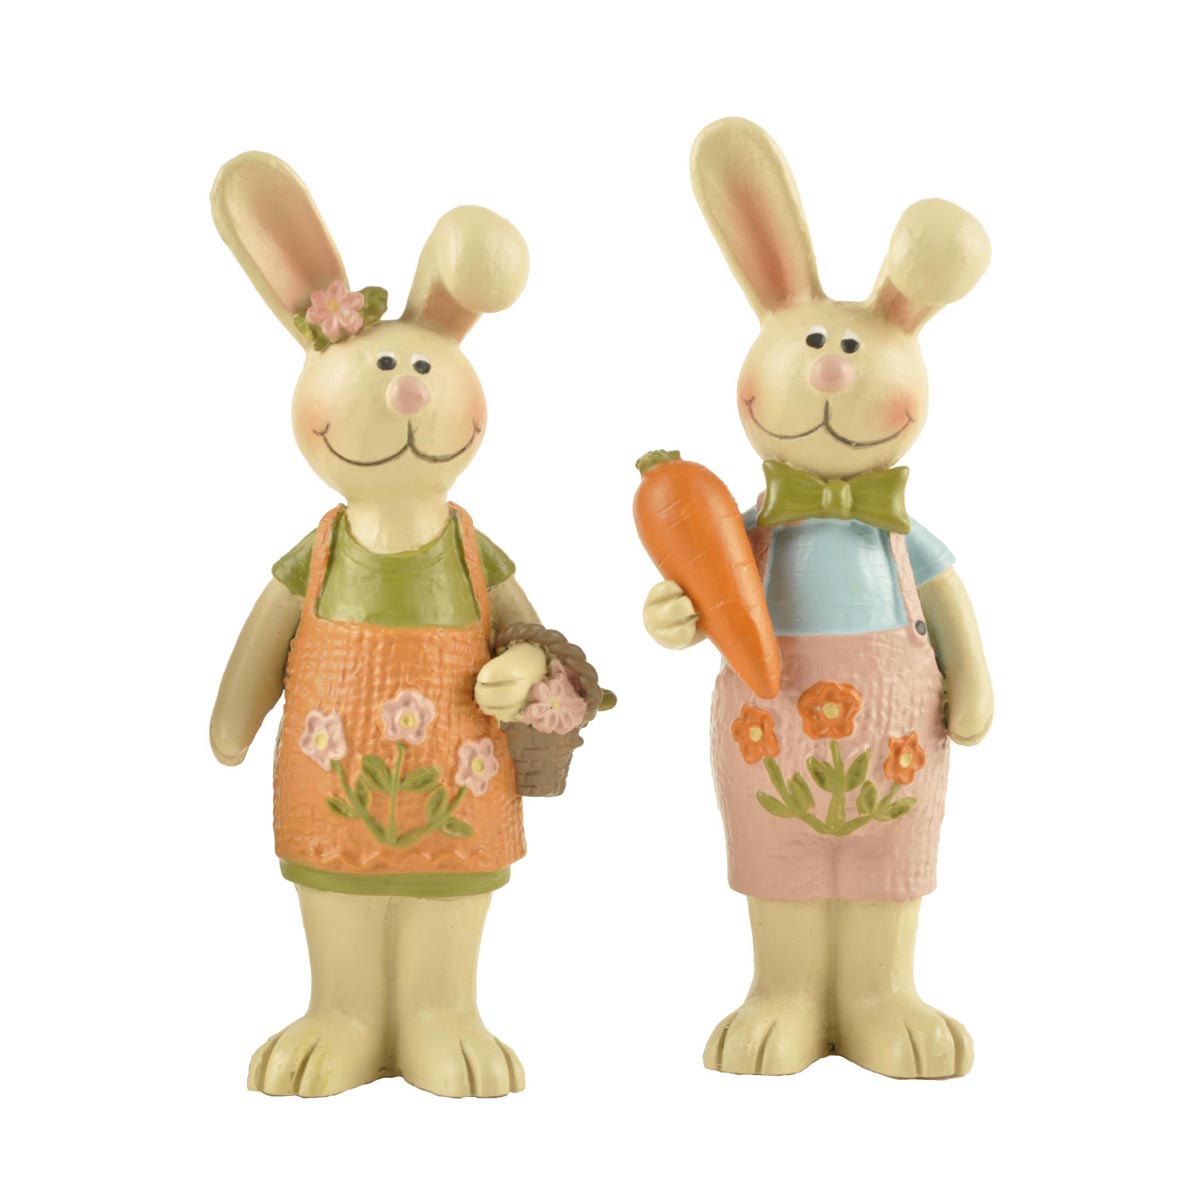 S/2 Cute Resin Easter Gift Statues Couple Rabbit with Carrot and Flower Basket